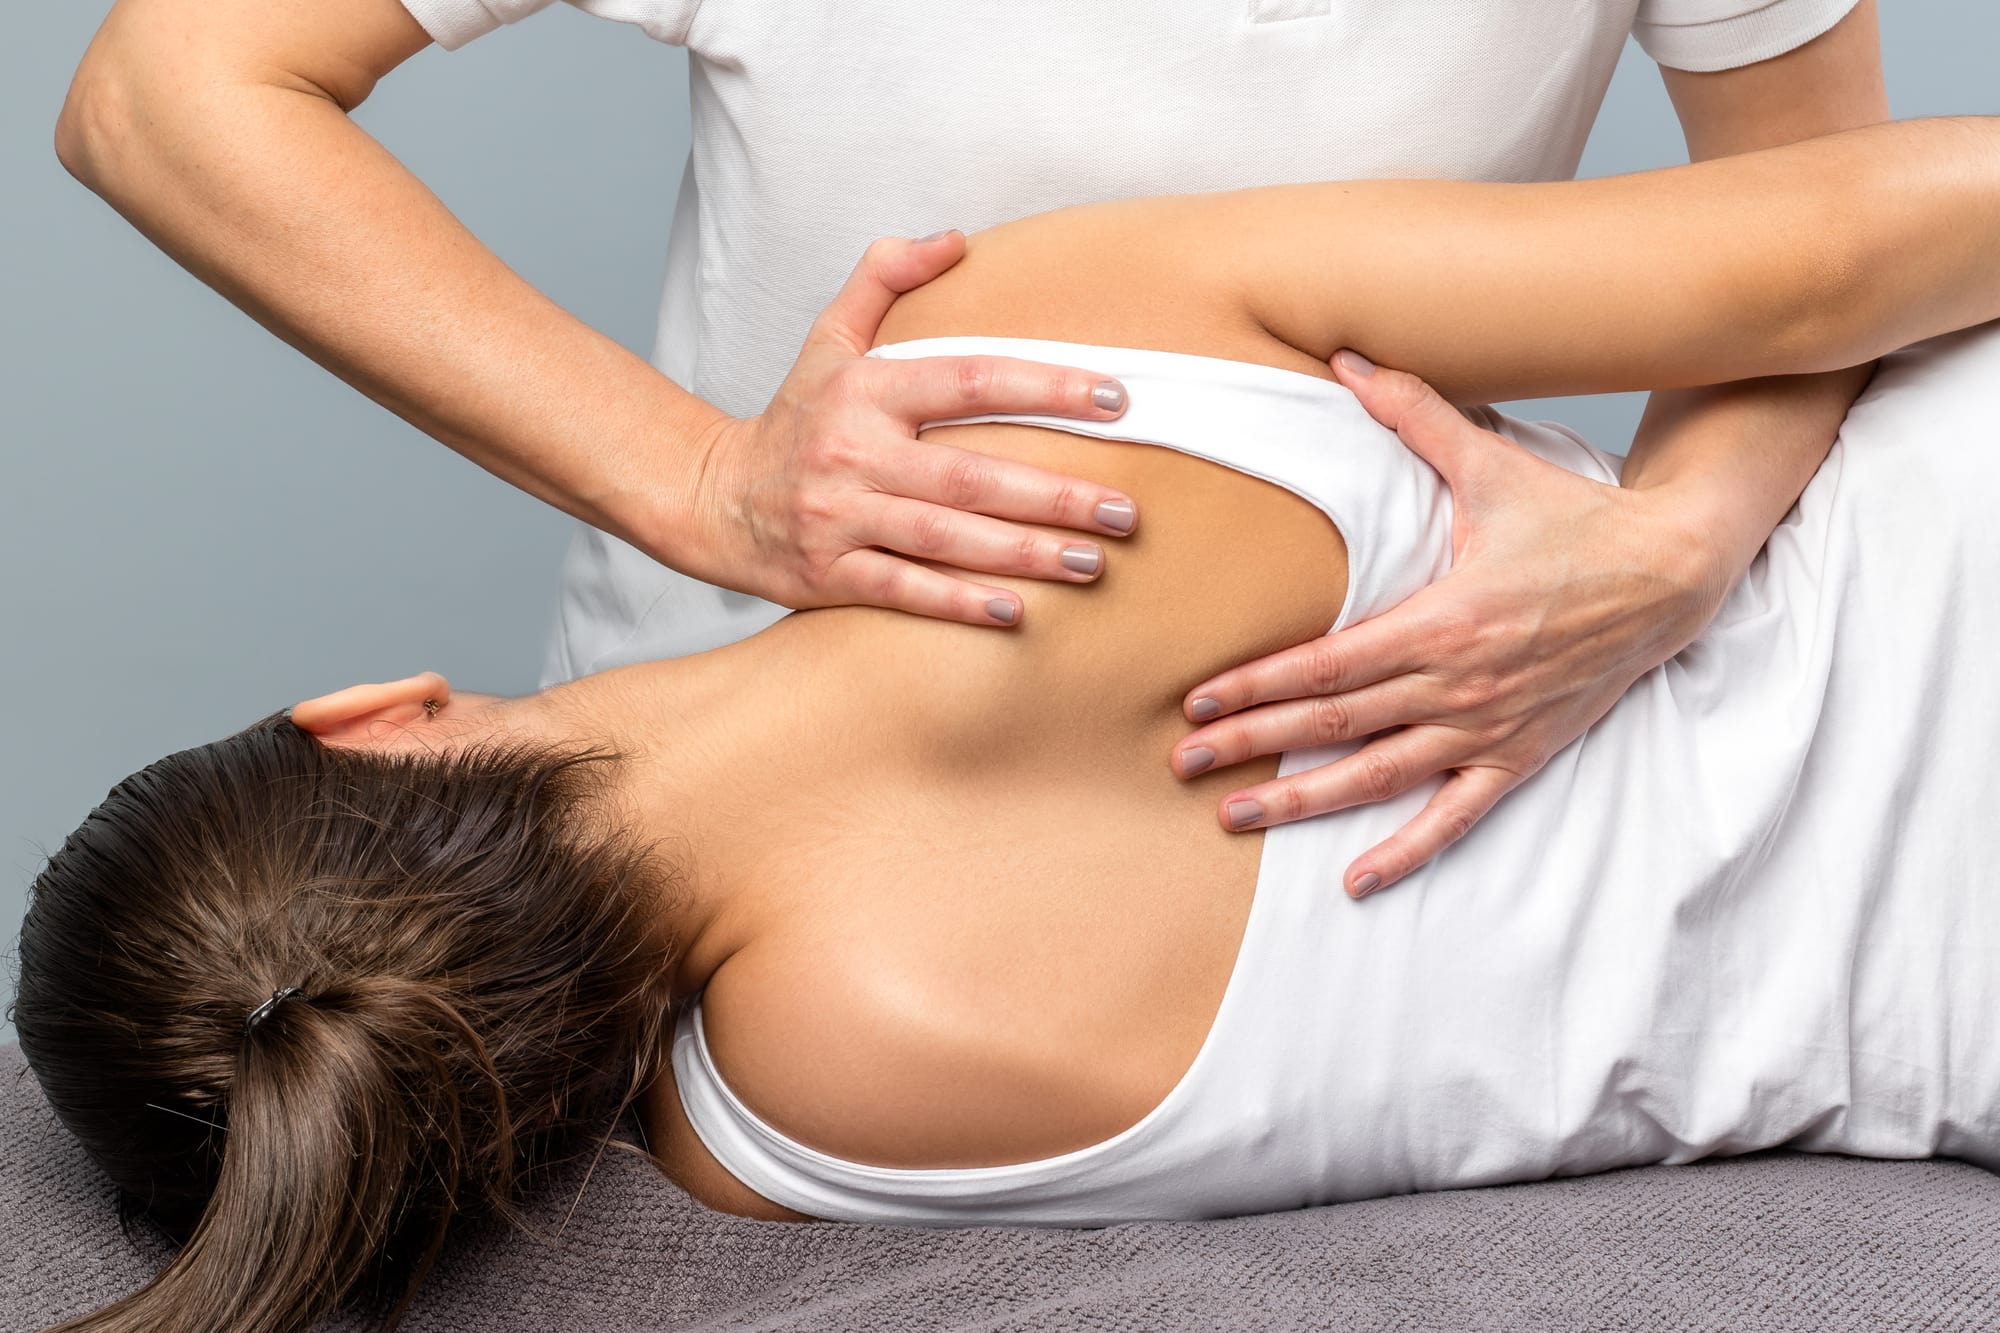 How Much Is A Chiropractic Visit?